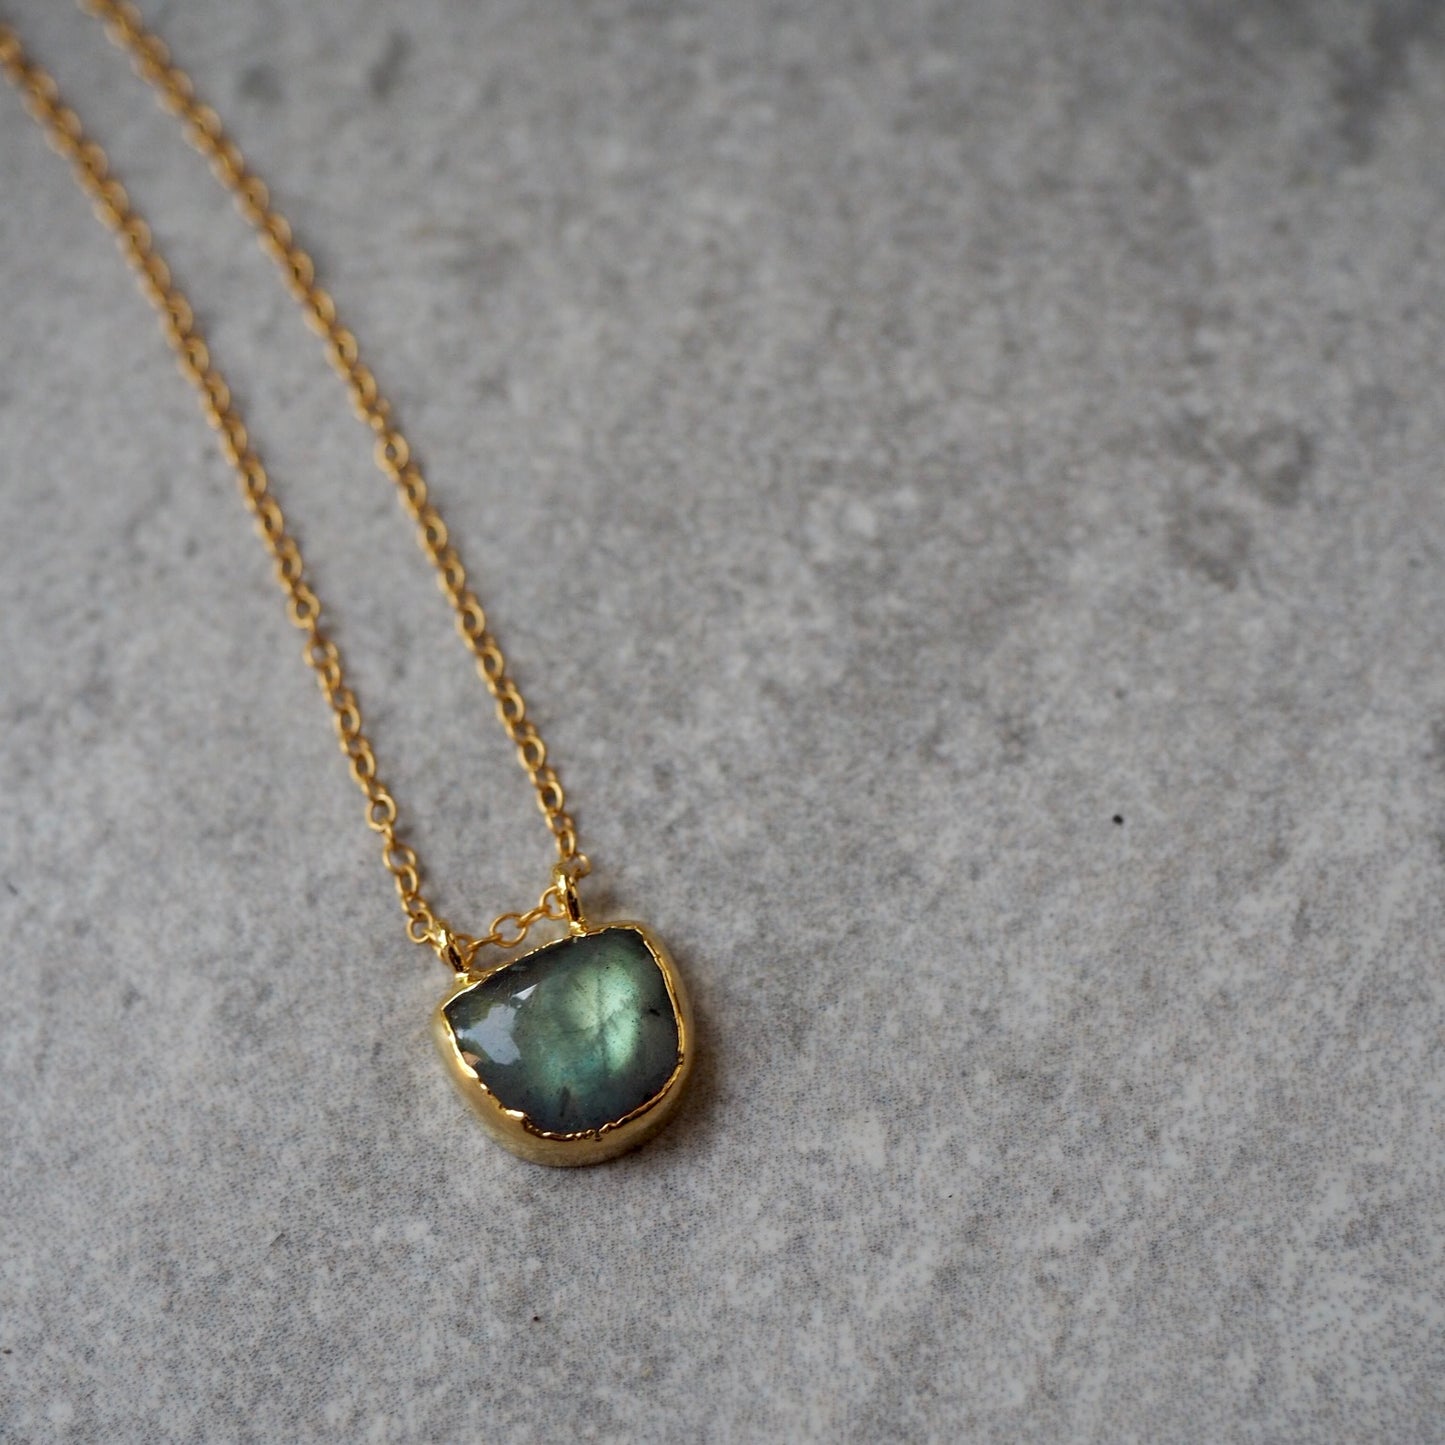 Gold filled necklace with Labradorite pendant by Wallis Designs